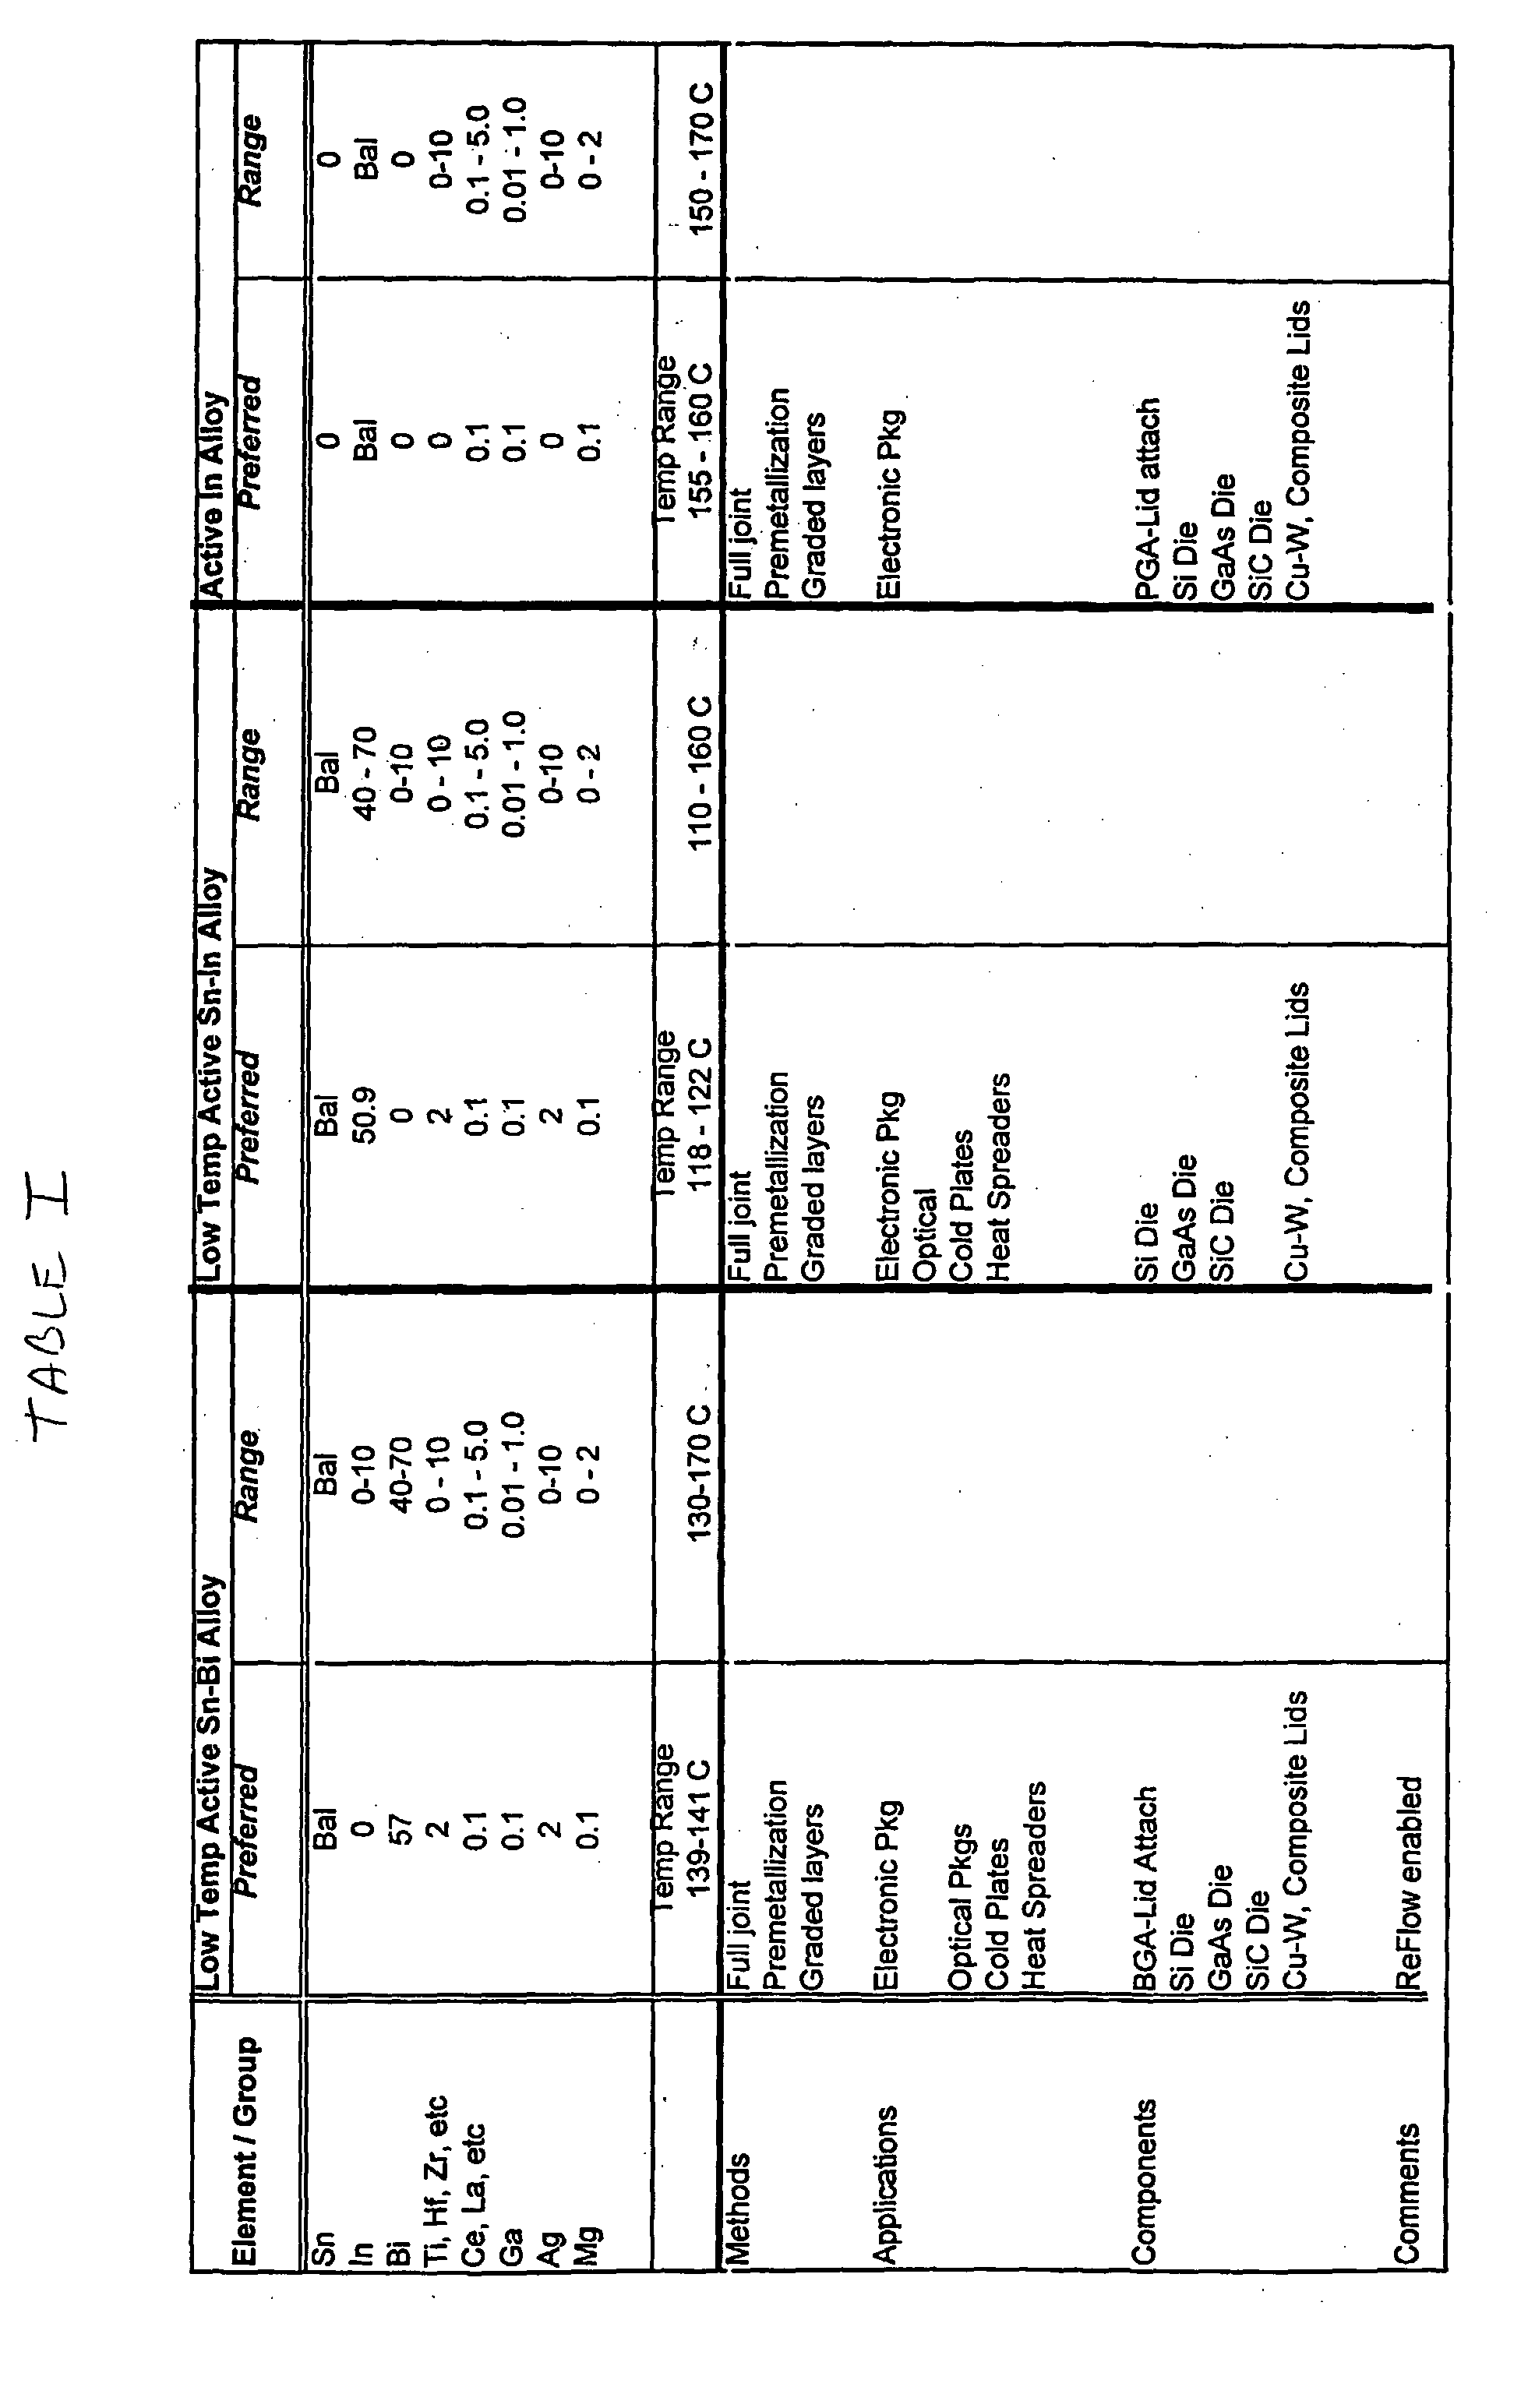 Electronic Package Formed Using Low-Temperature Active Solder Including Indium, Bismuth, and/or Cadmium